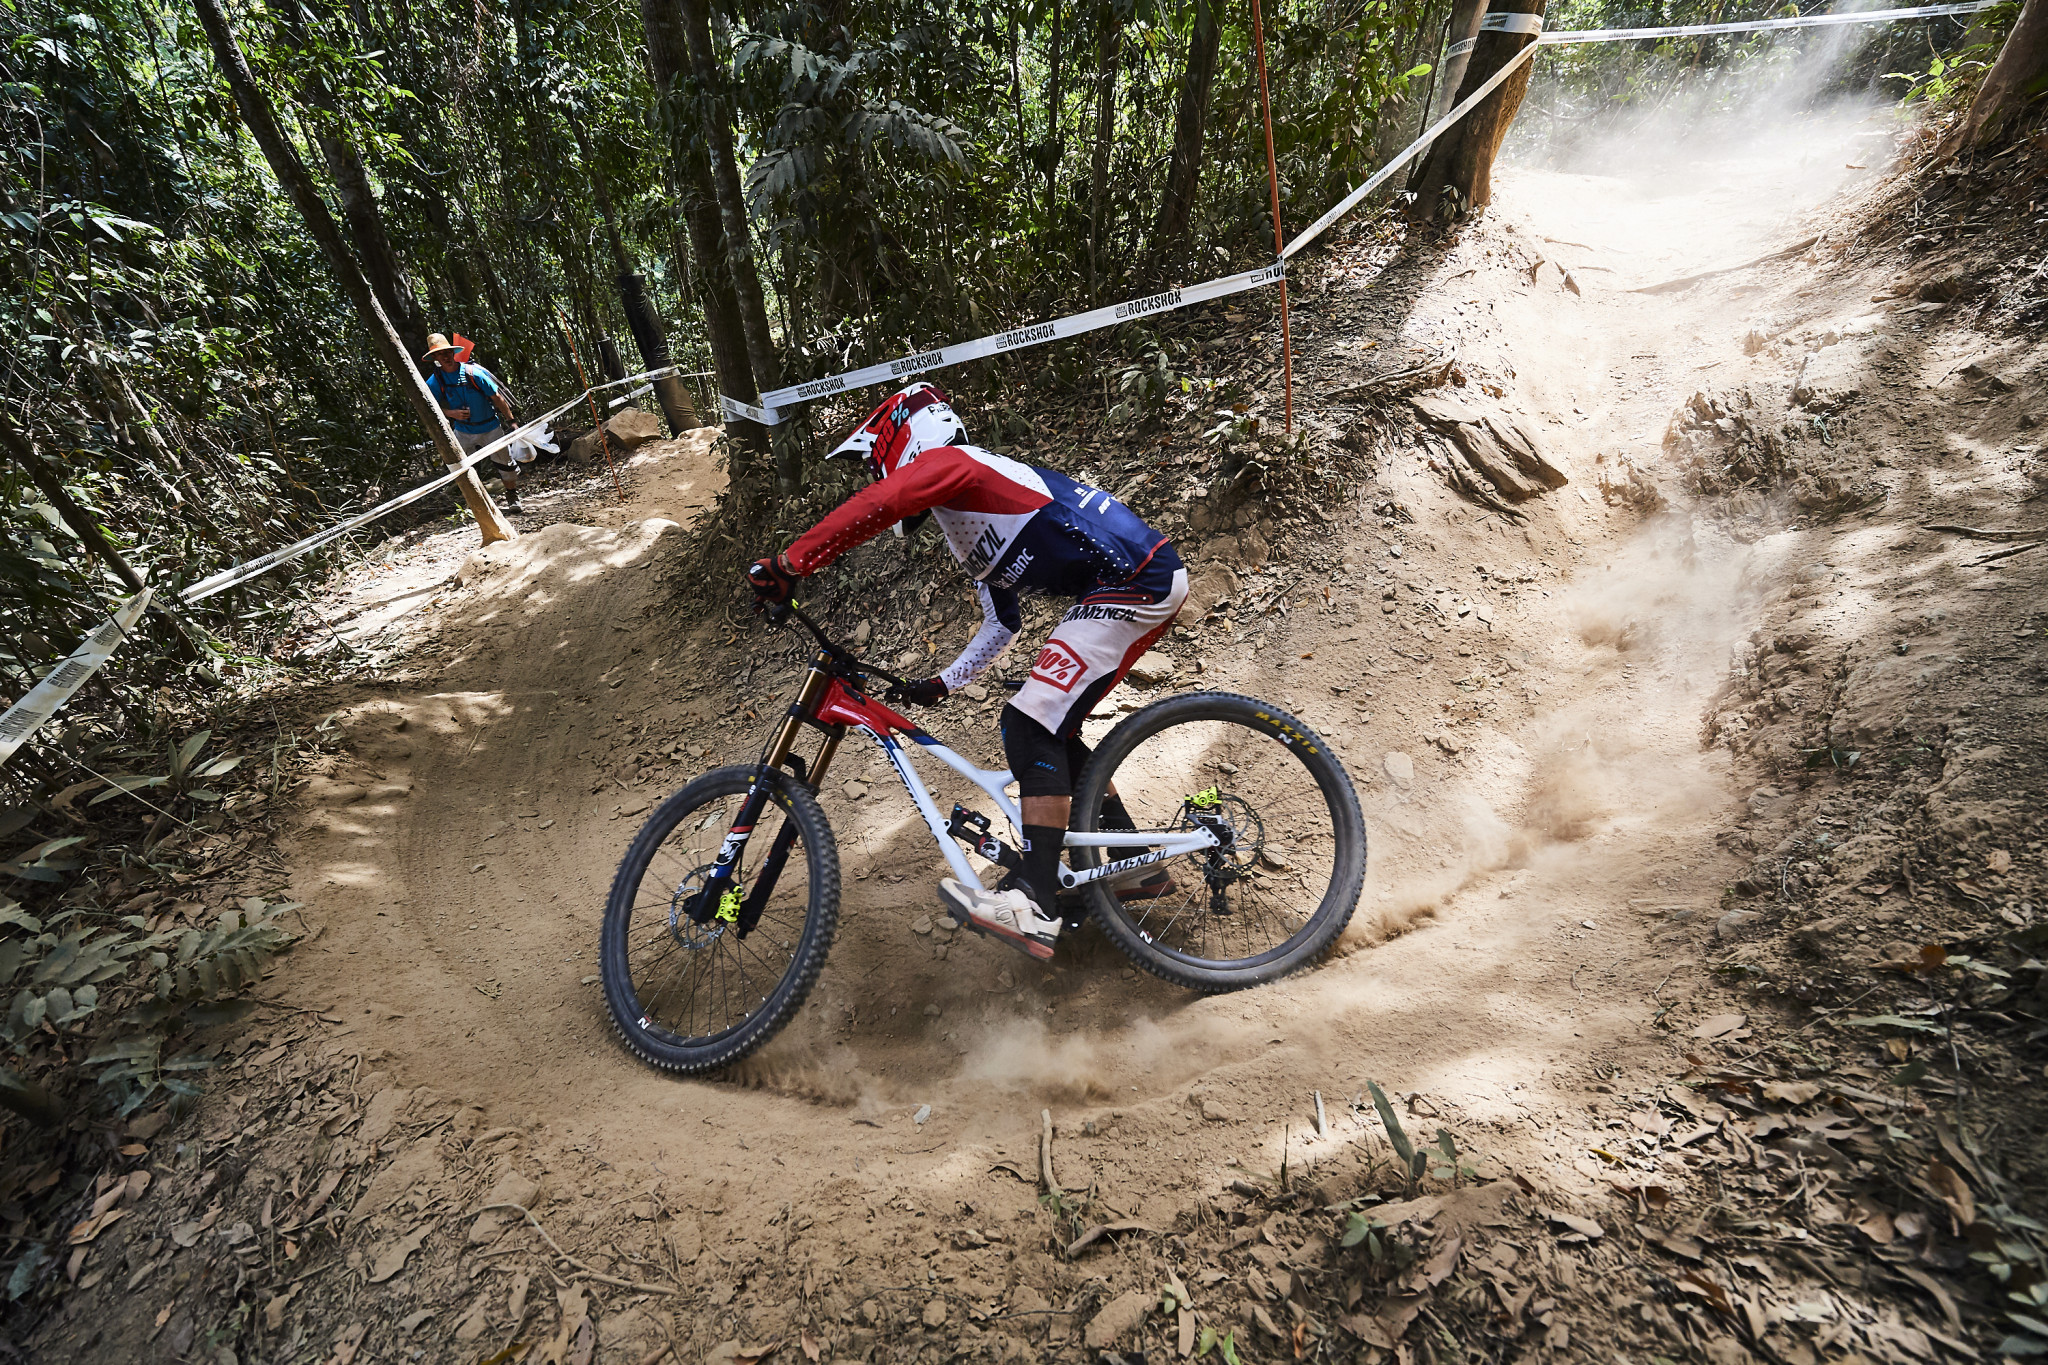 Amaury Pierron won the men's elite title at the Fort Williams Mountain Bike World Cup leg ©Getty Images